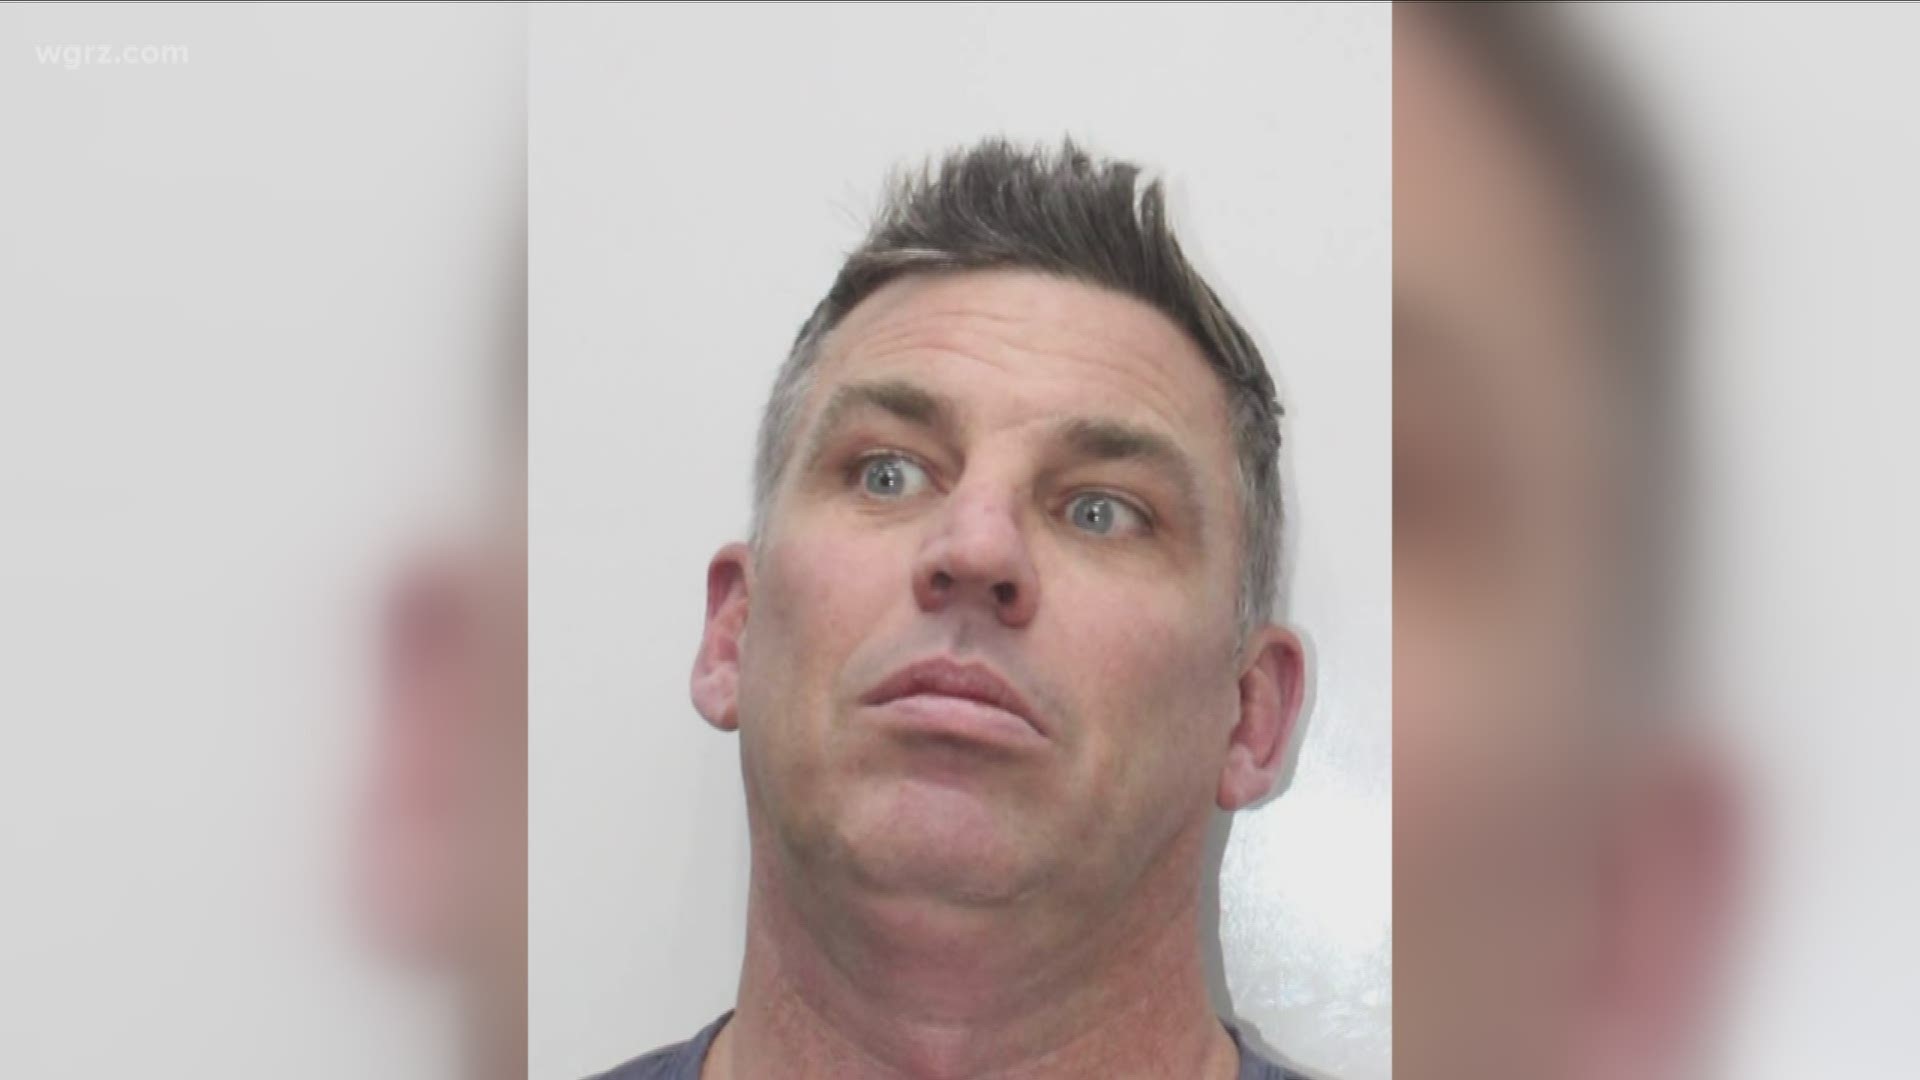 Former Buffalo Sabre player arrested in bar fight